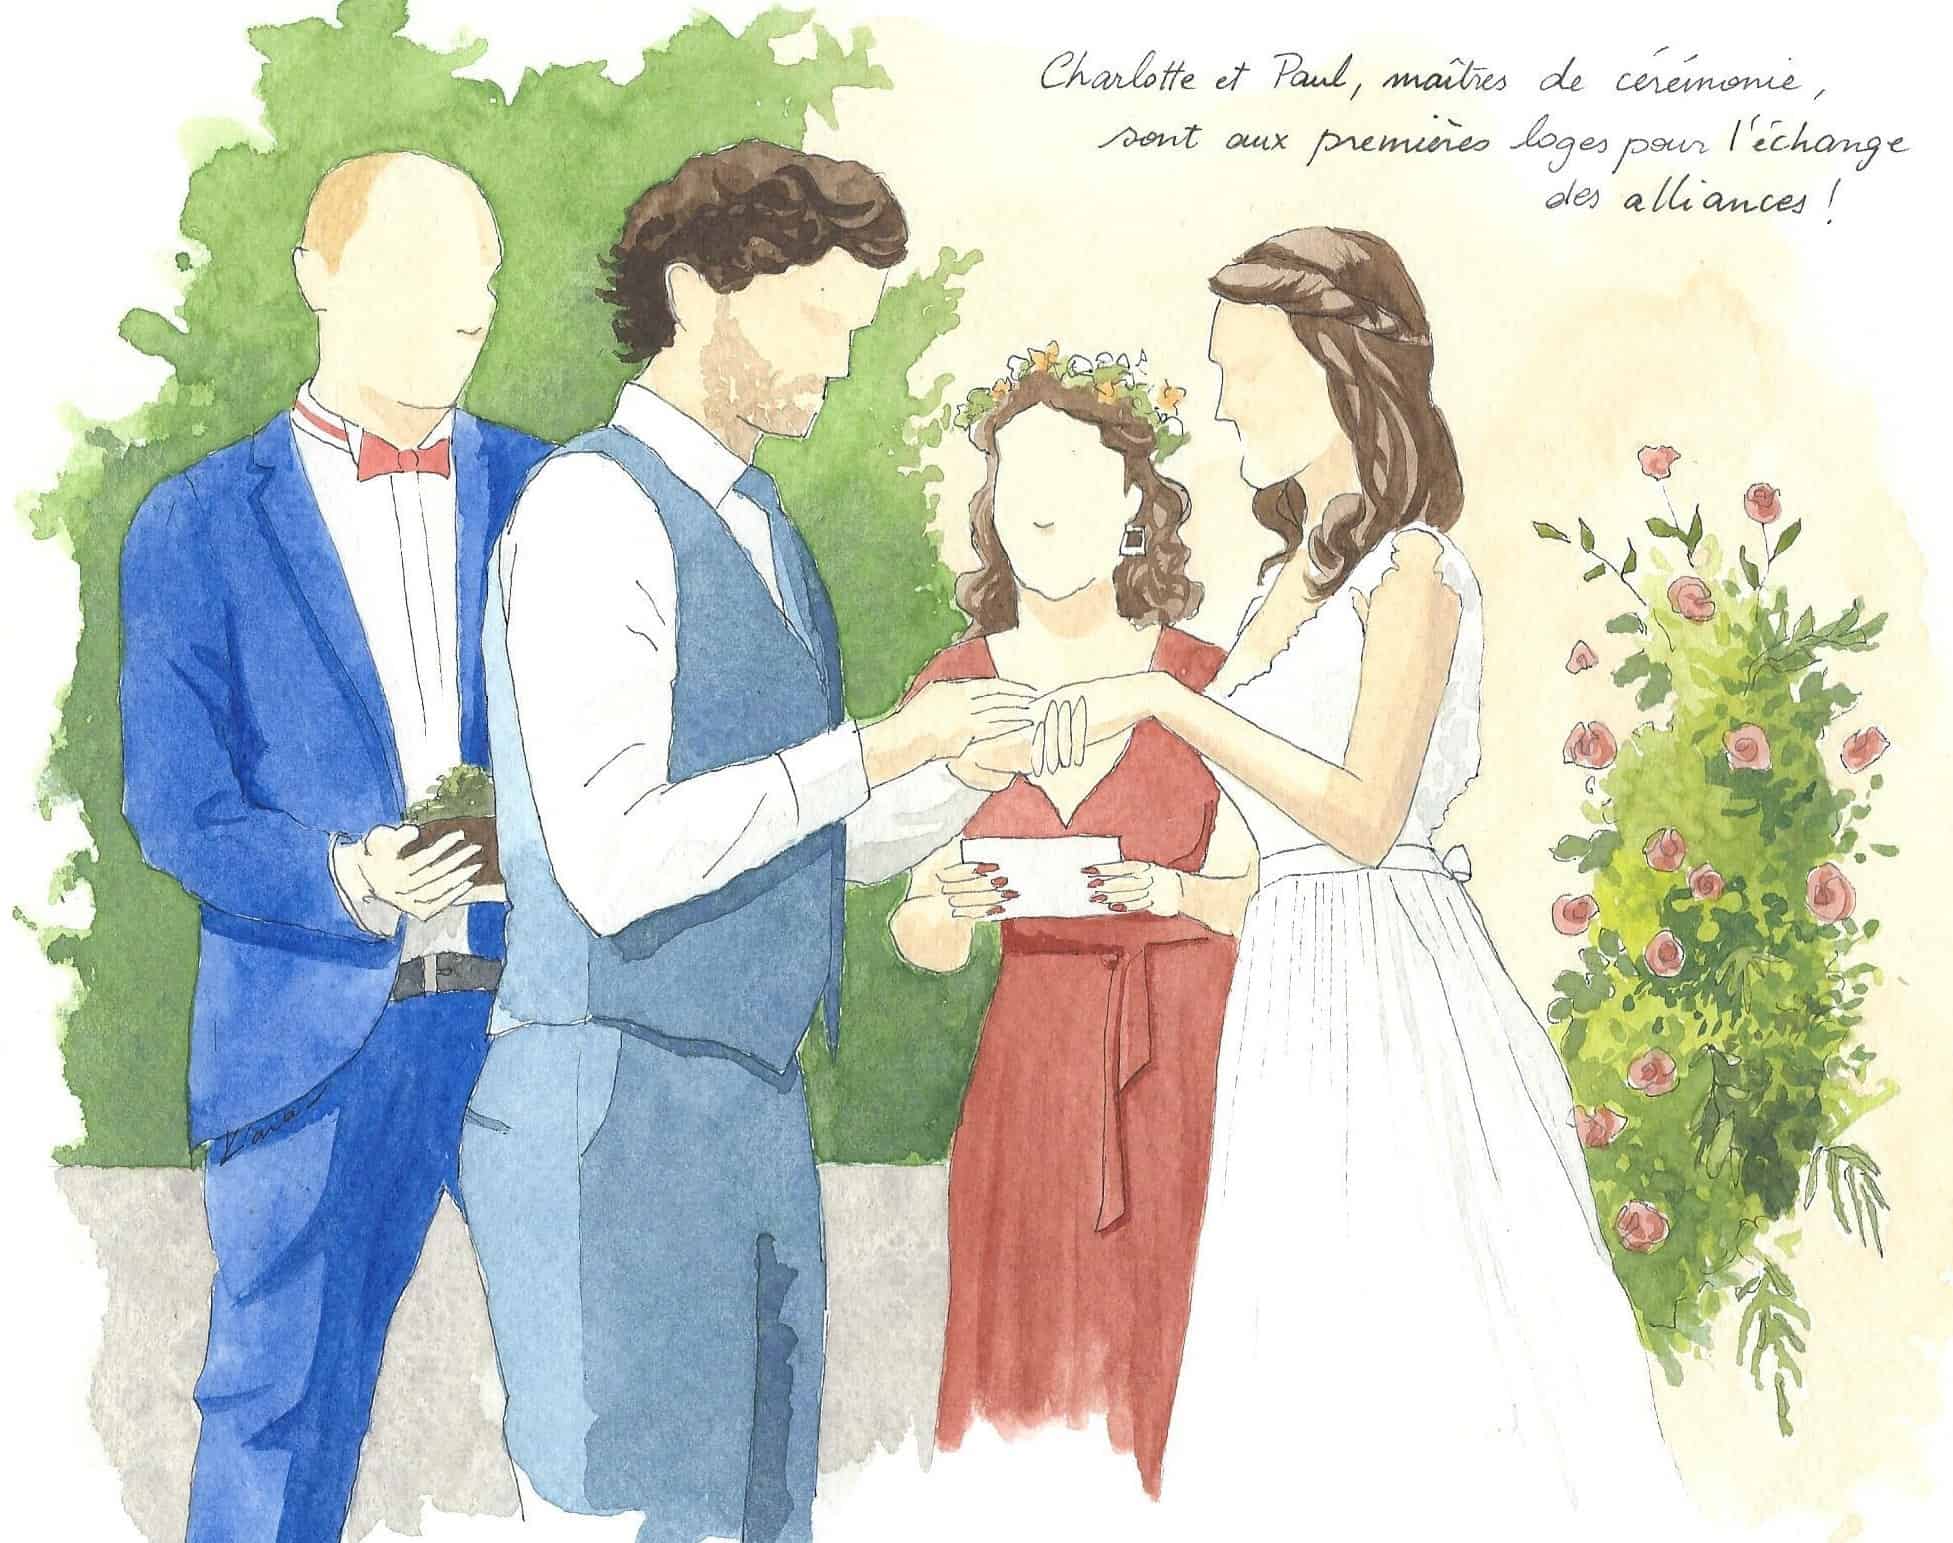 Painting of a wedding ceremony in South of France